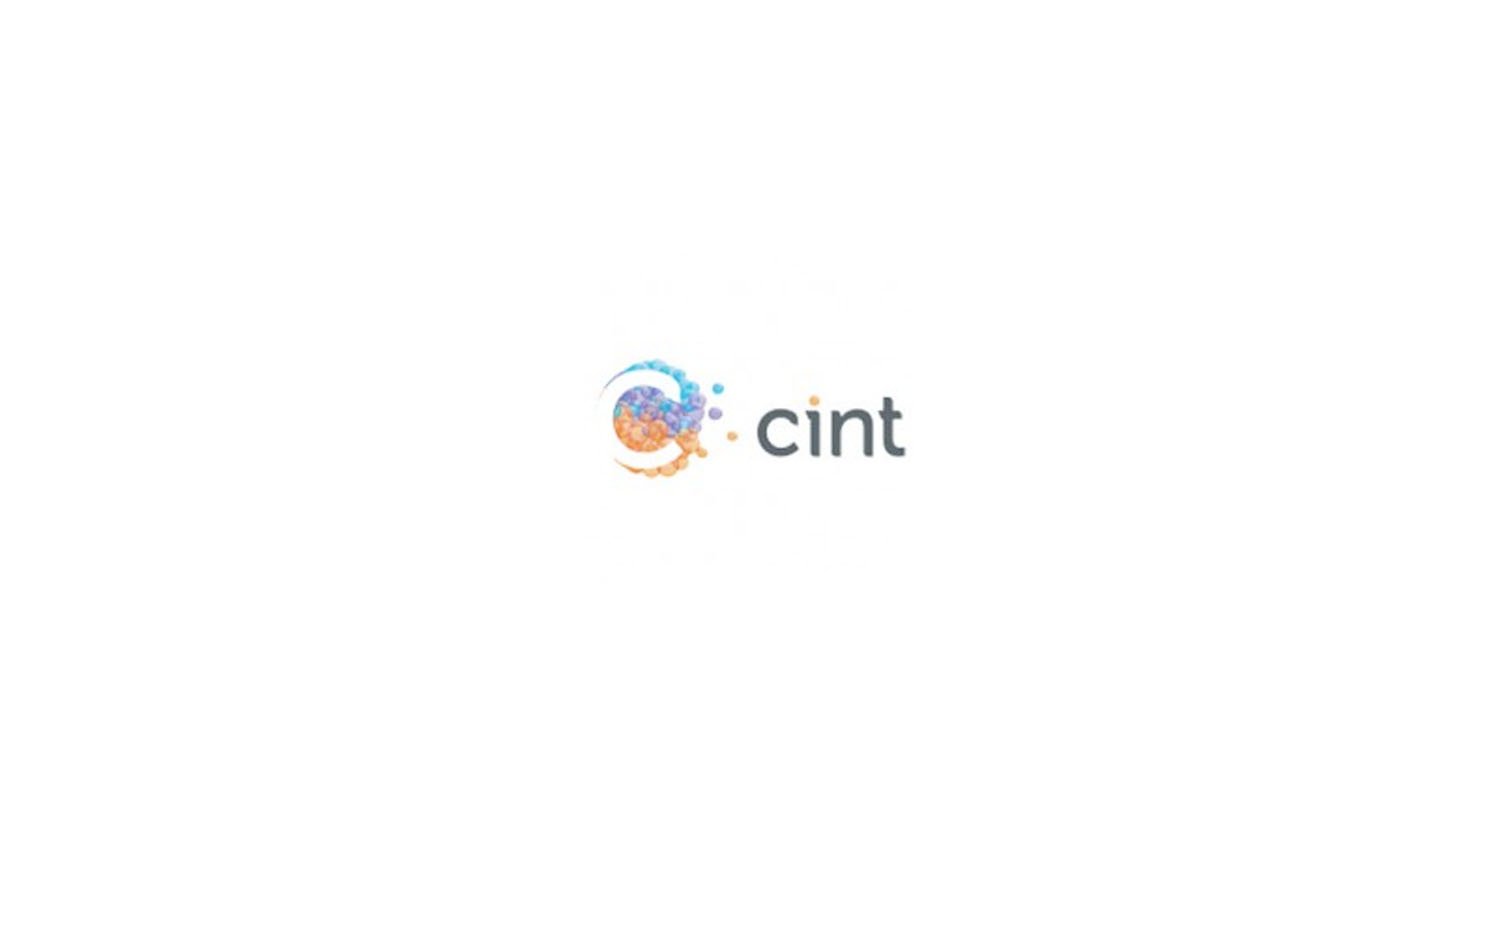 Lumi partners with Cint to build the world’s largest,...